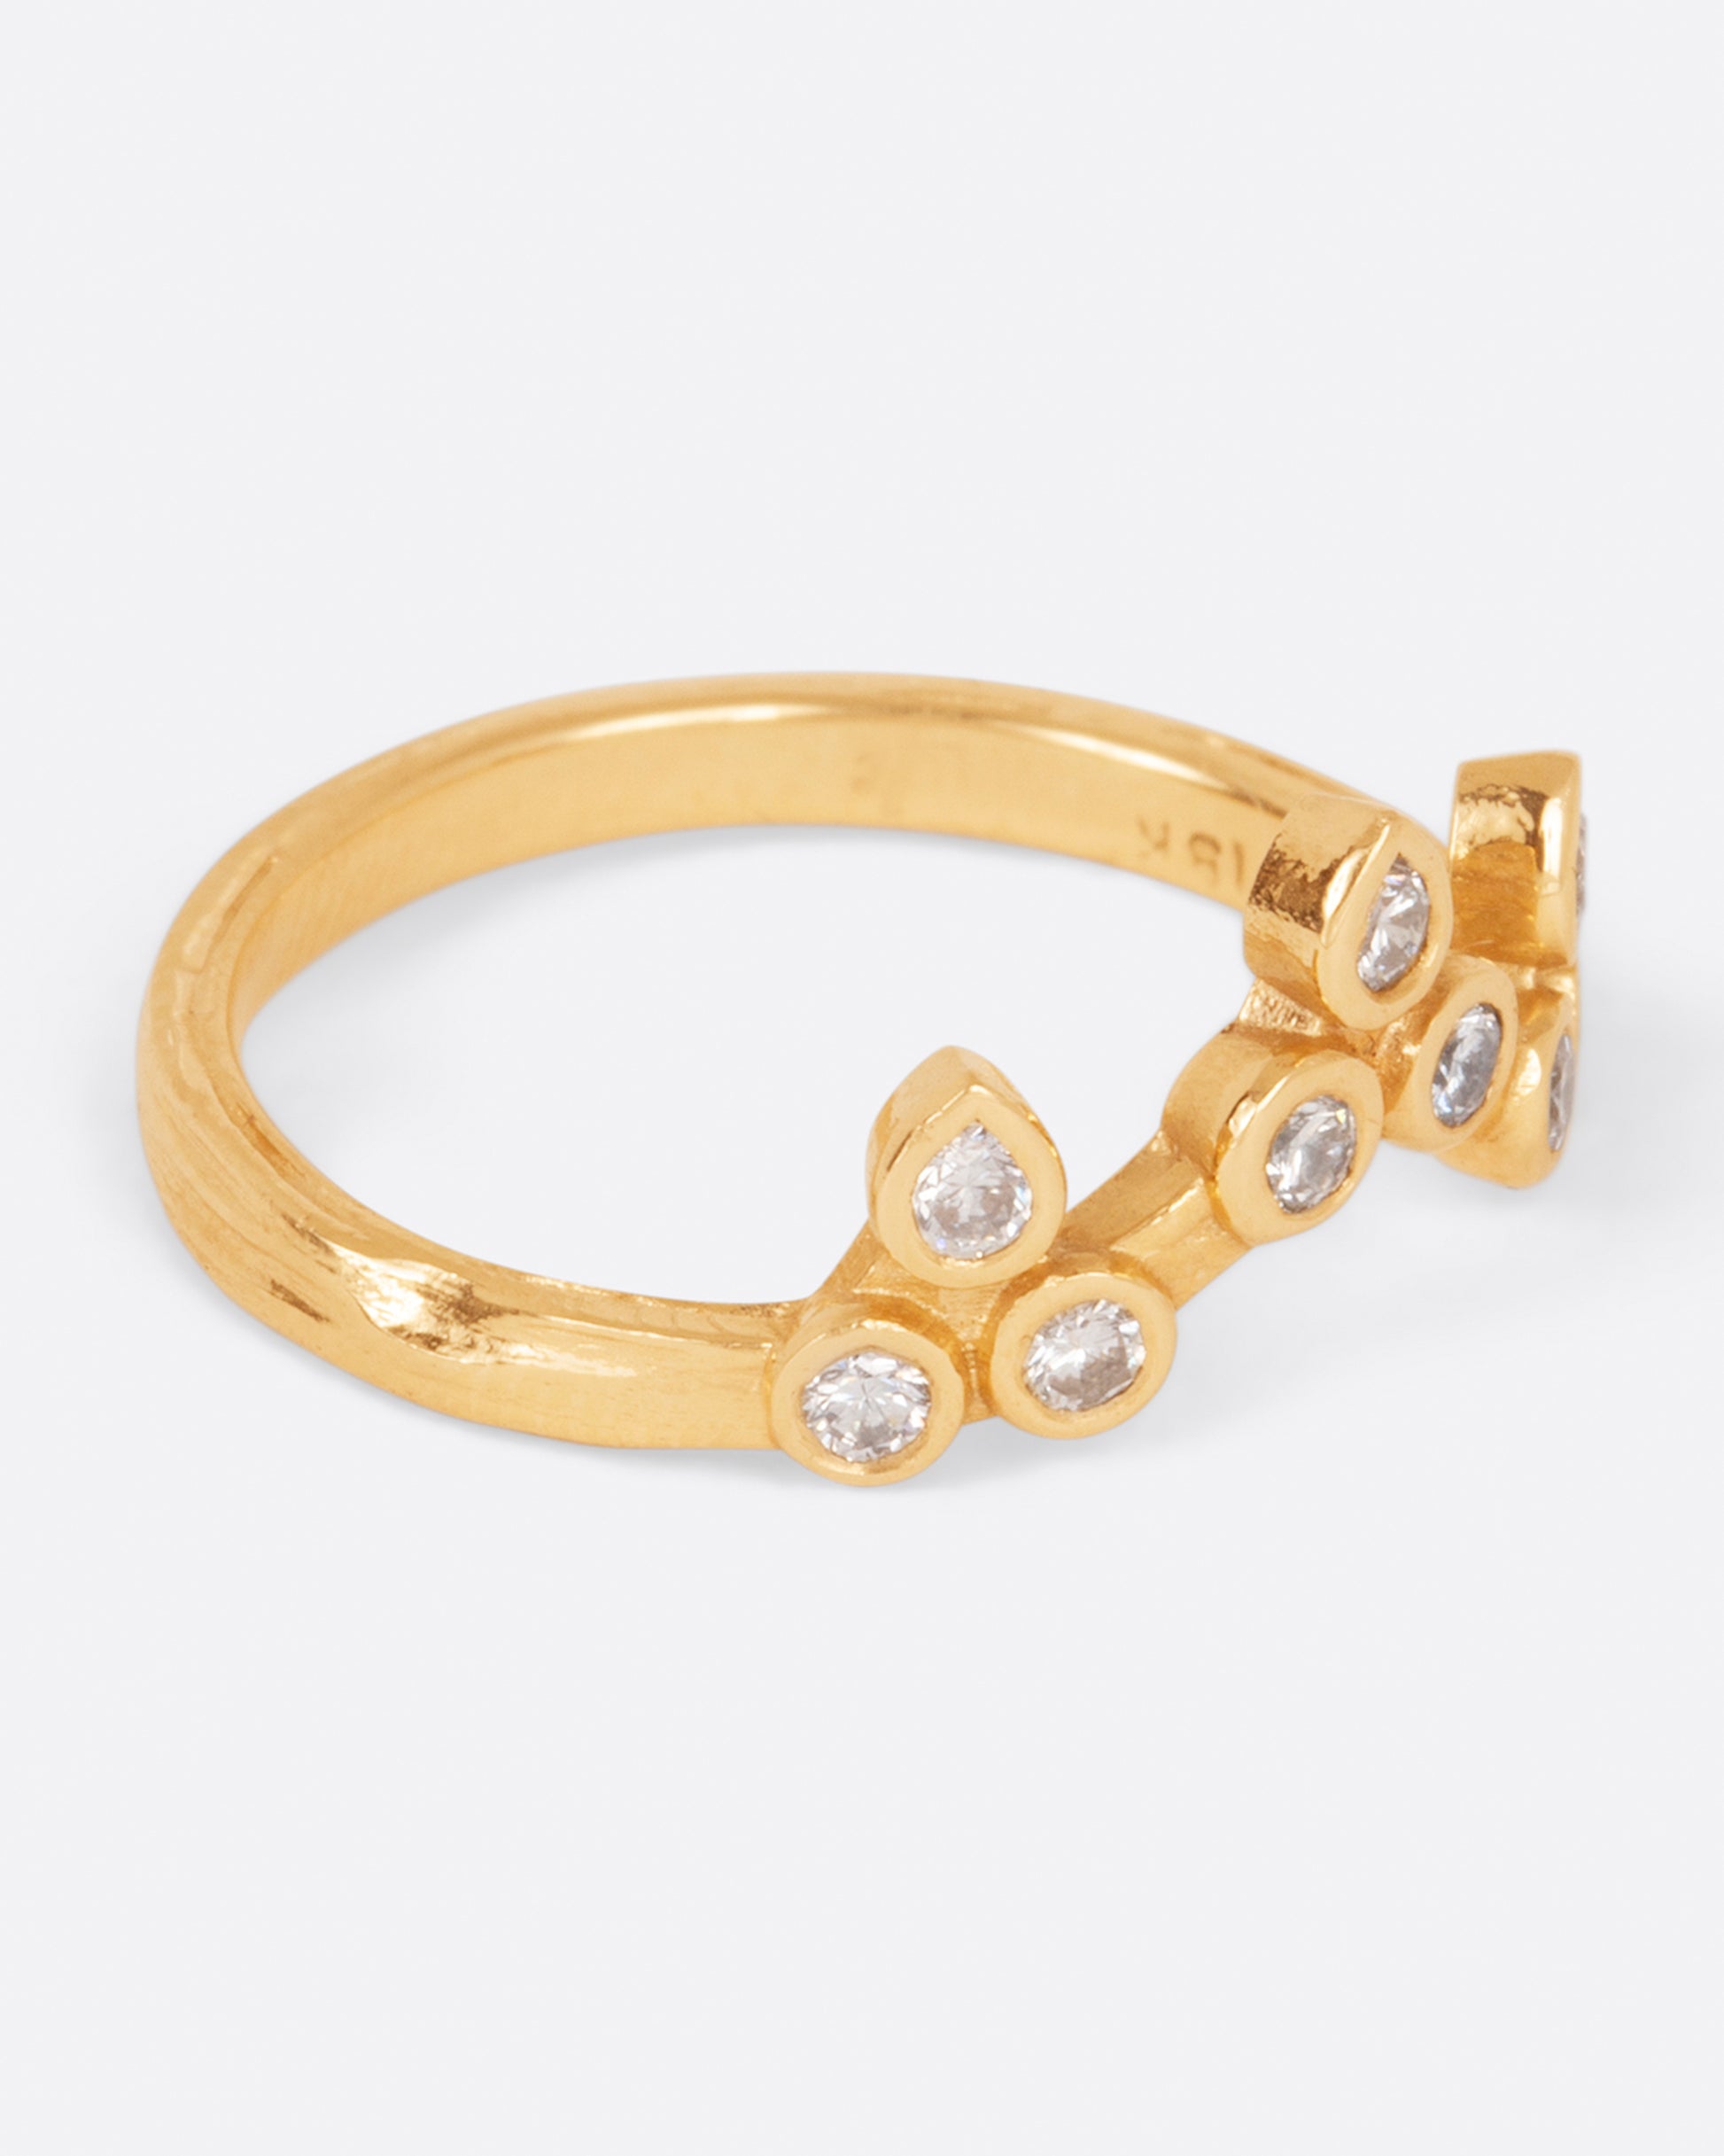 A curved yellow gold ring with a crown of round white diamonds, shown from the side.